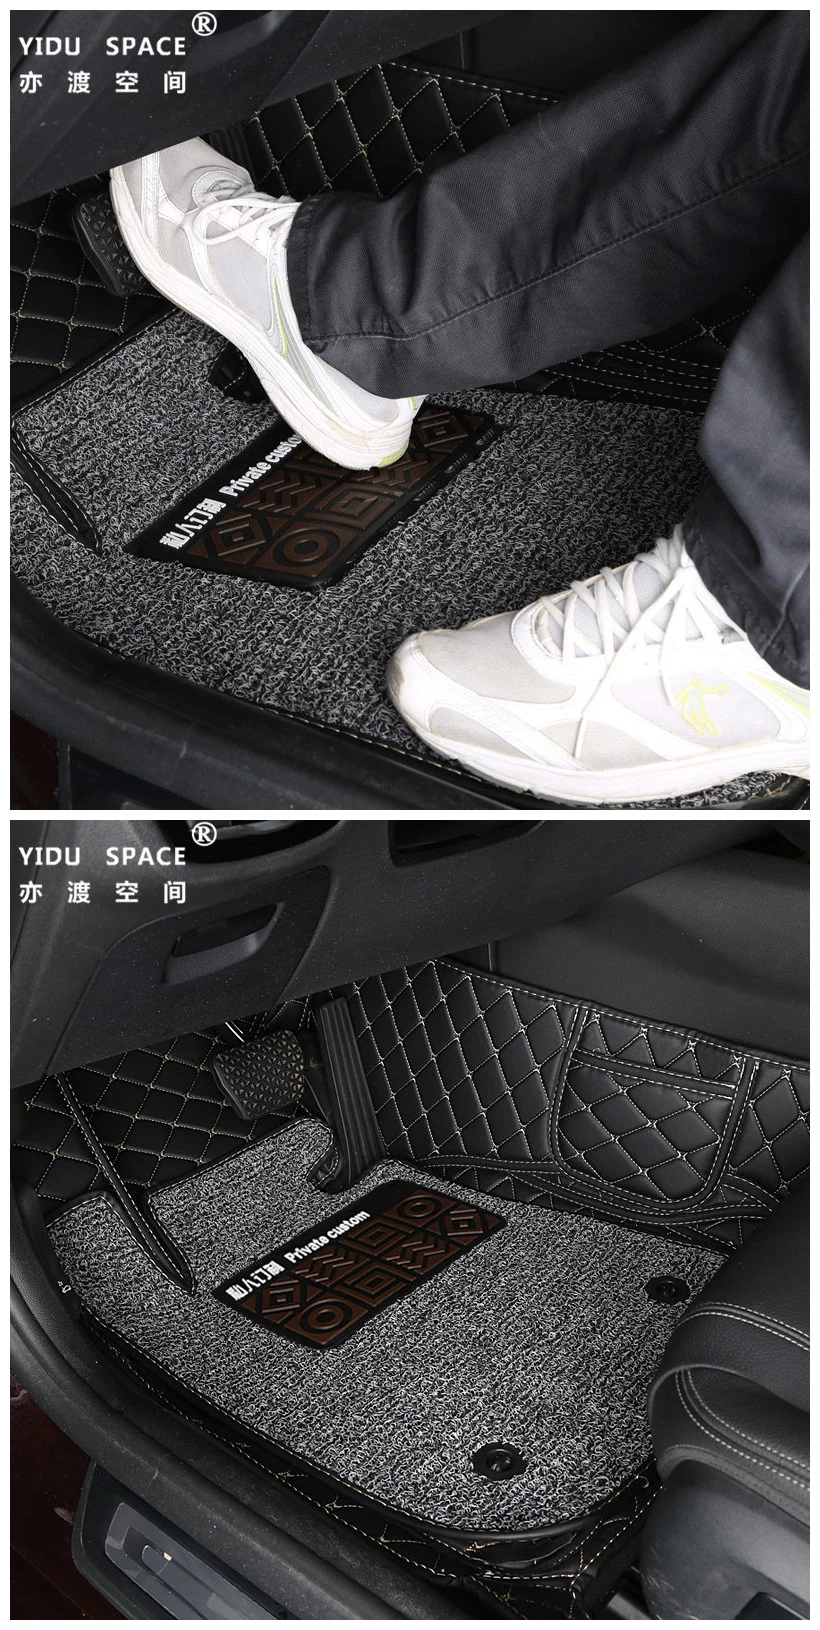 Customized Hand Sewing Leather Anti Slip 5D Car Floor Mats